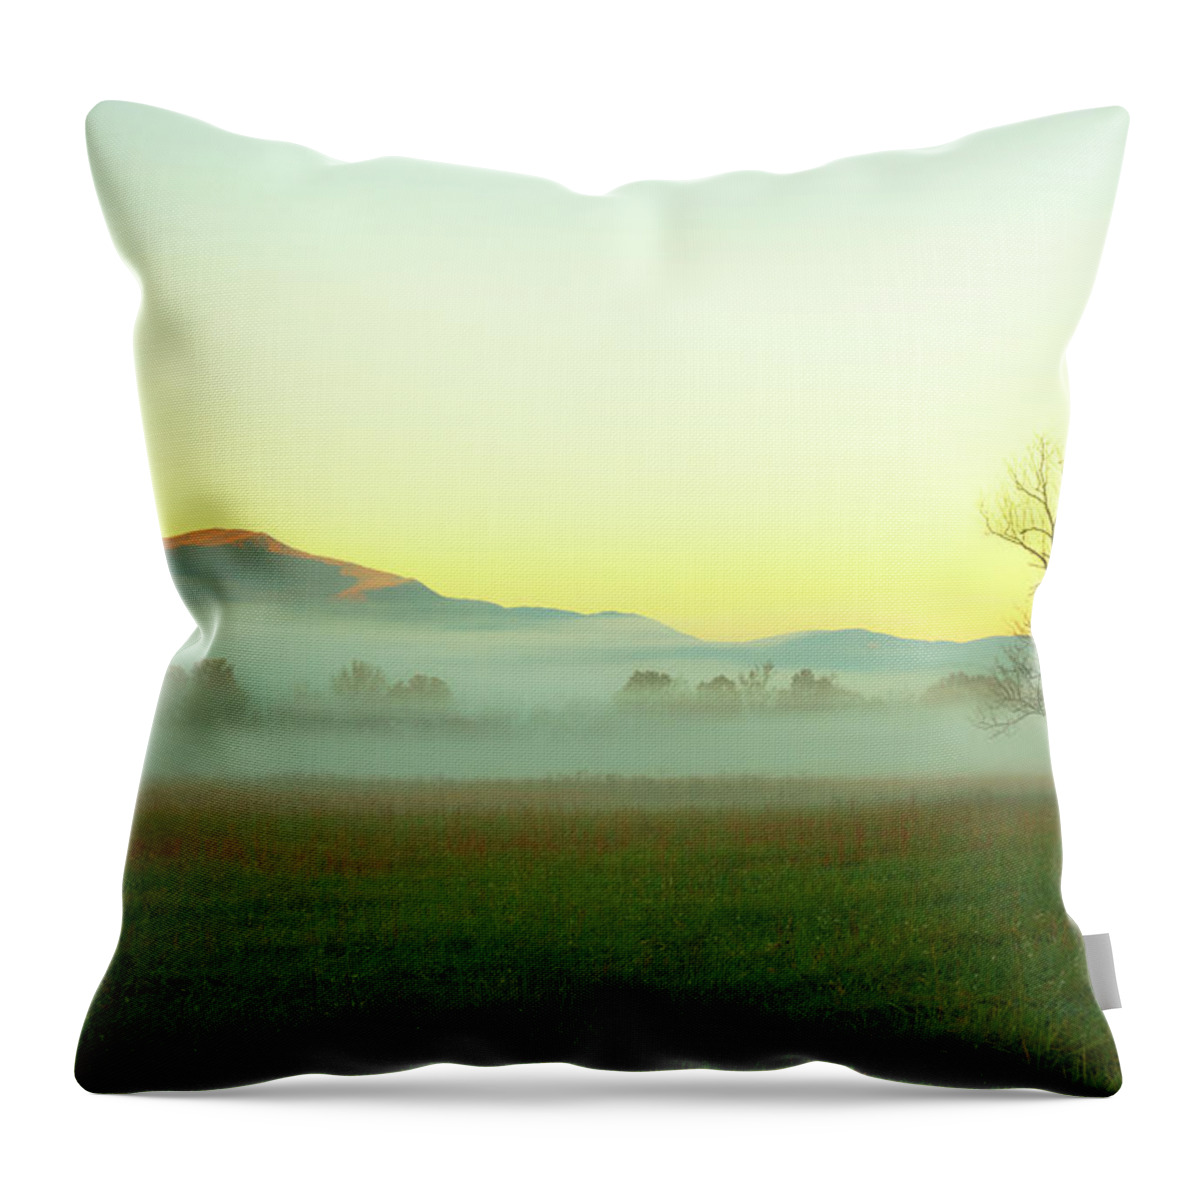 Scenics Throw Pillow featuring the photograph Solitary Tree In The Fog, Great Smoky by Moreiso